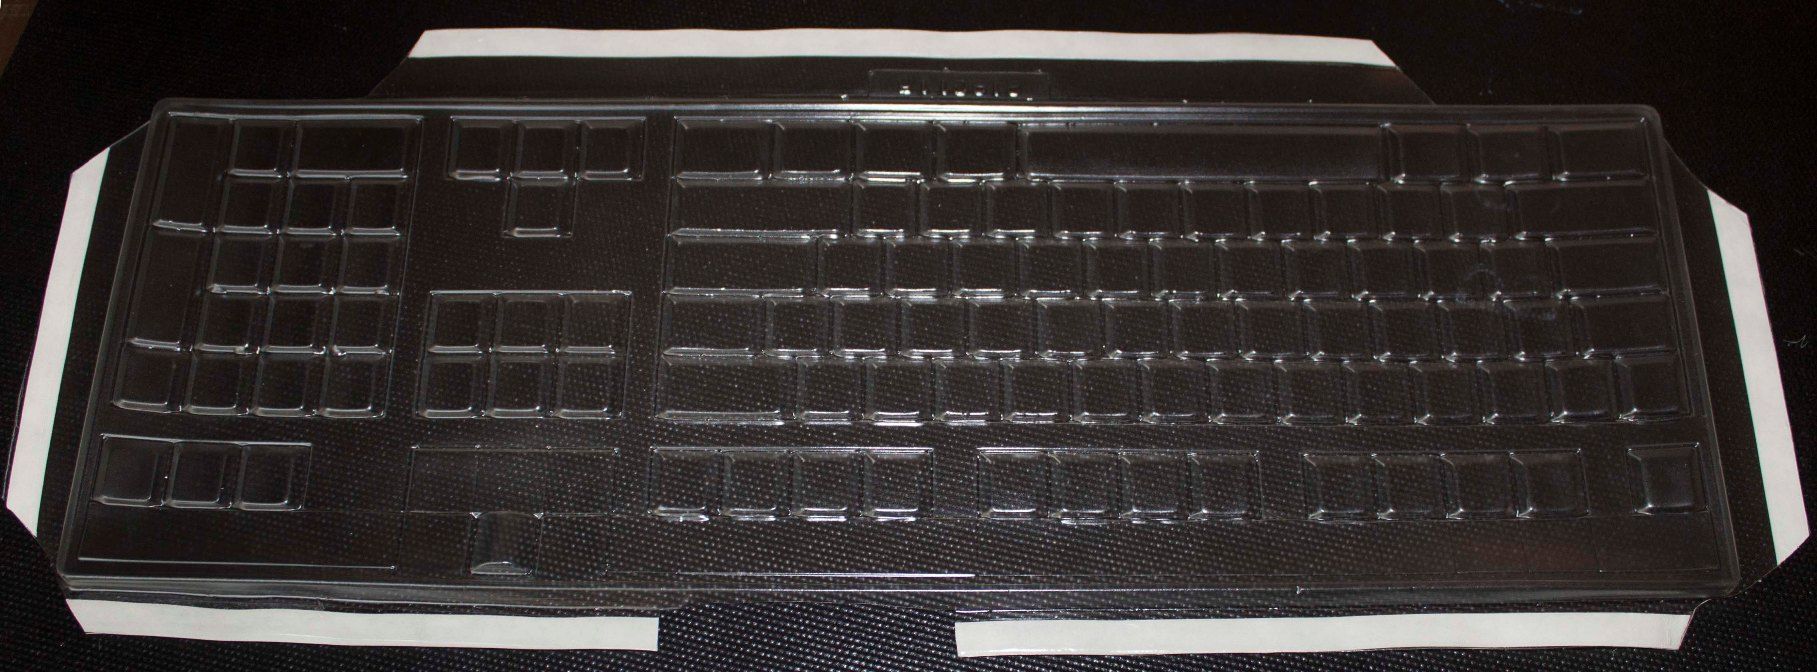 Keybord Cover for Keytronic E06101D C 112D104 Keyboard not Included